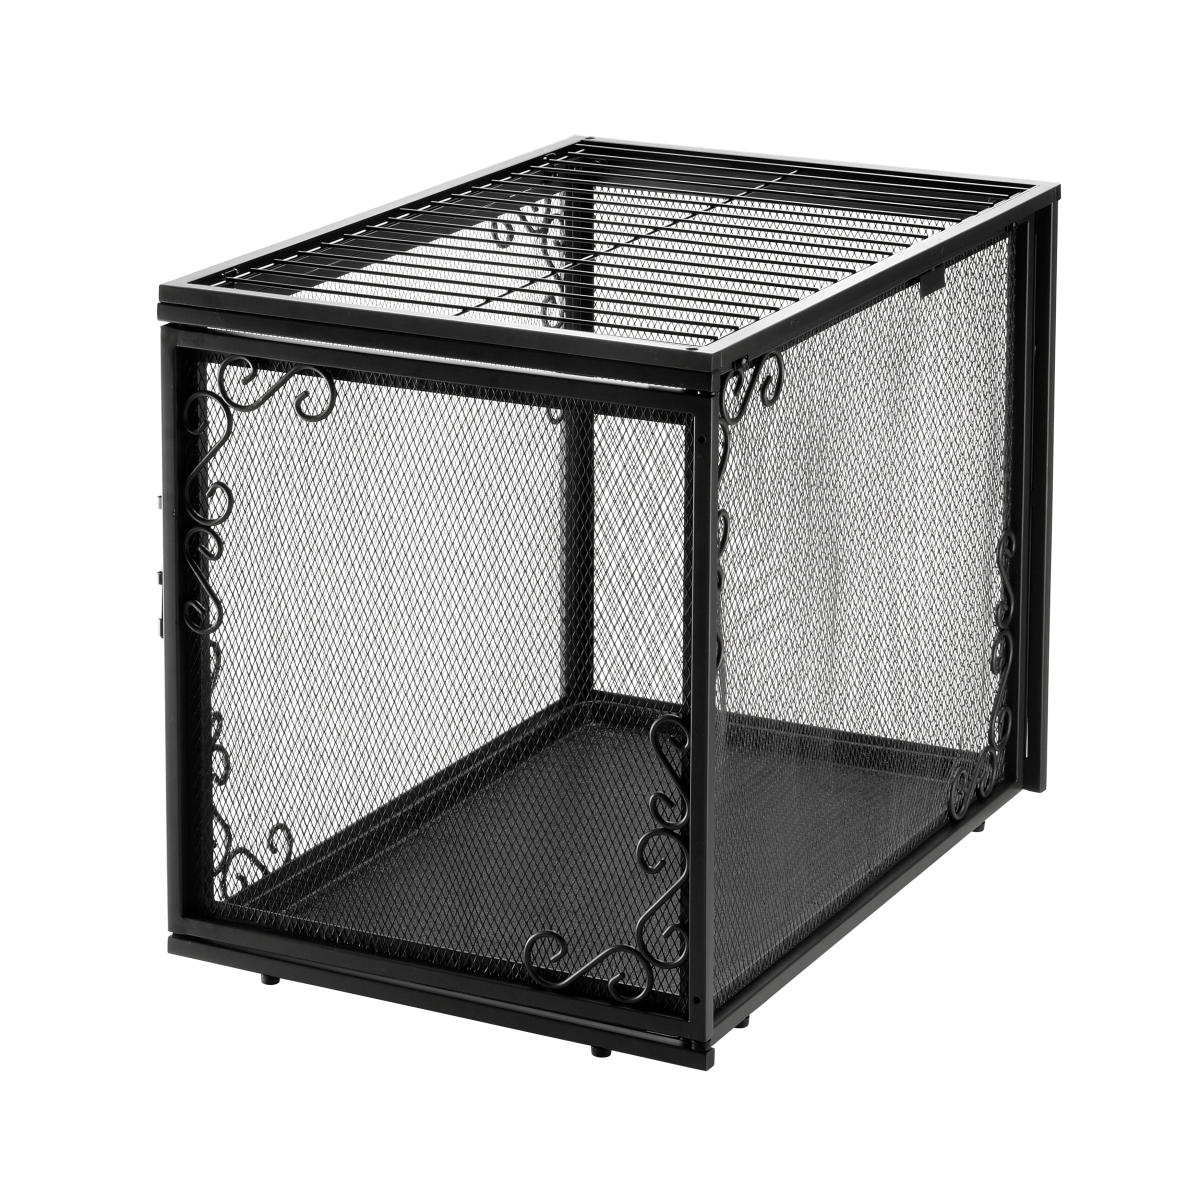 Picture of Richell 80017 Richell Metal Mesh Pet Crate Medium in Black